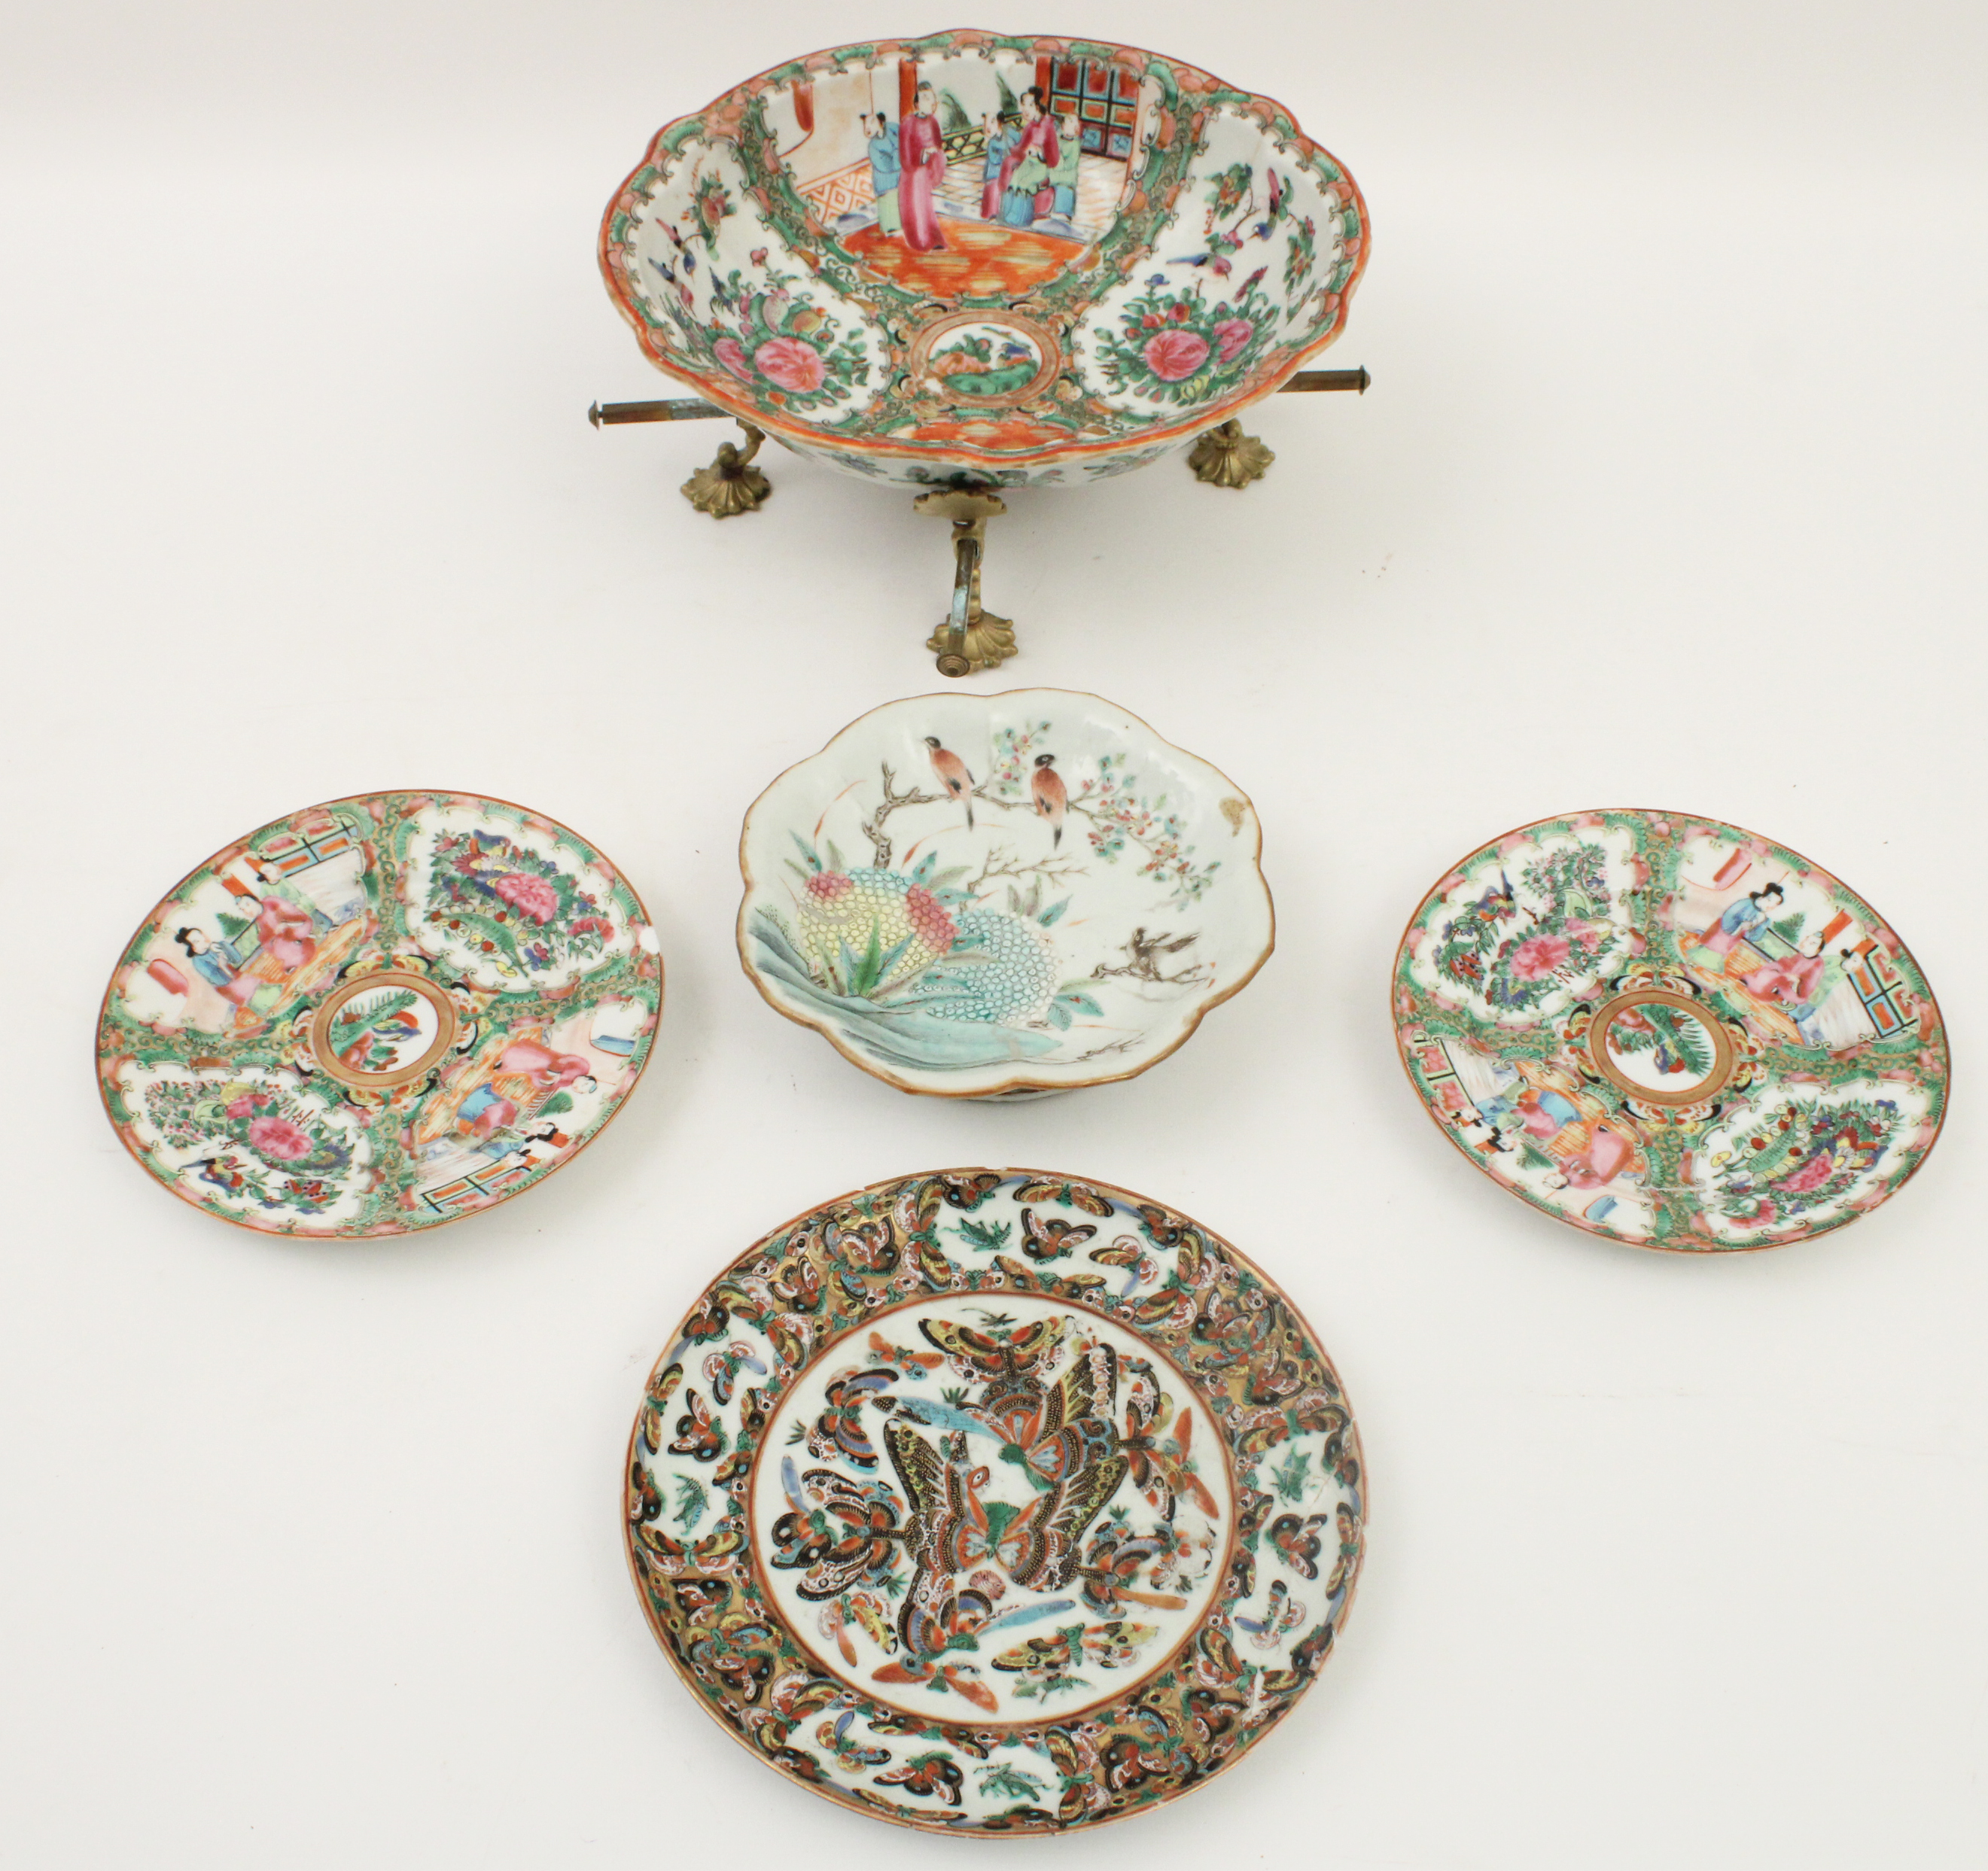 ROSE FAMILLE 5 piece lot of Chinese 35e6b7